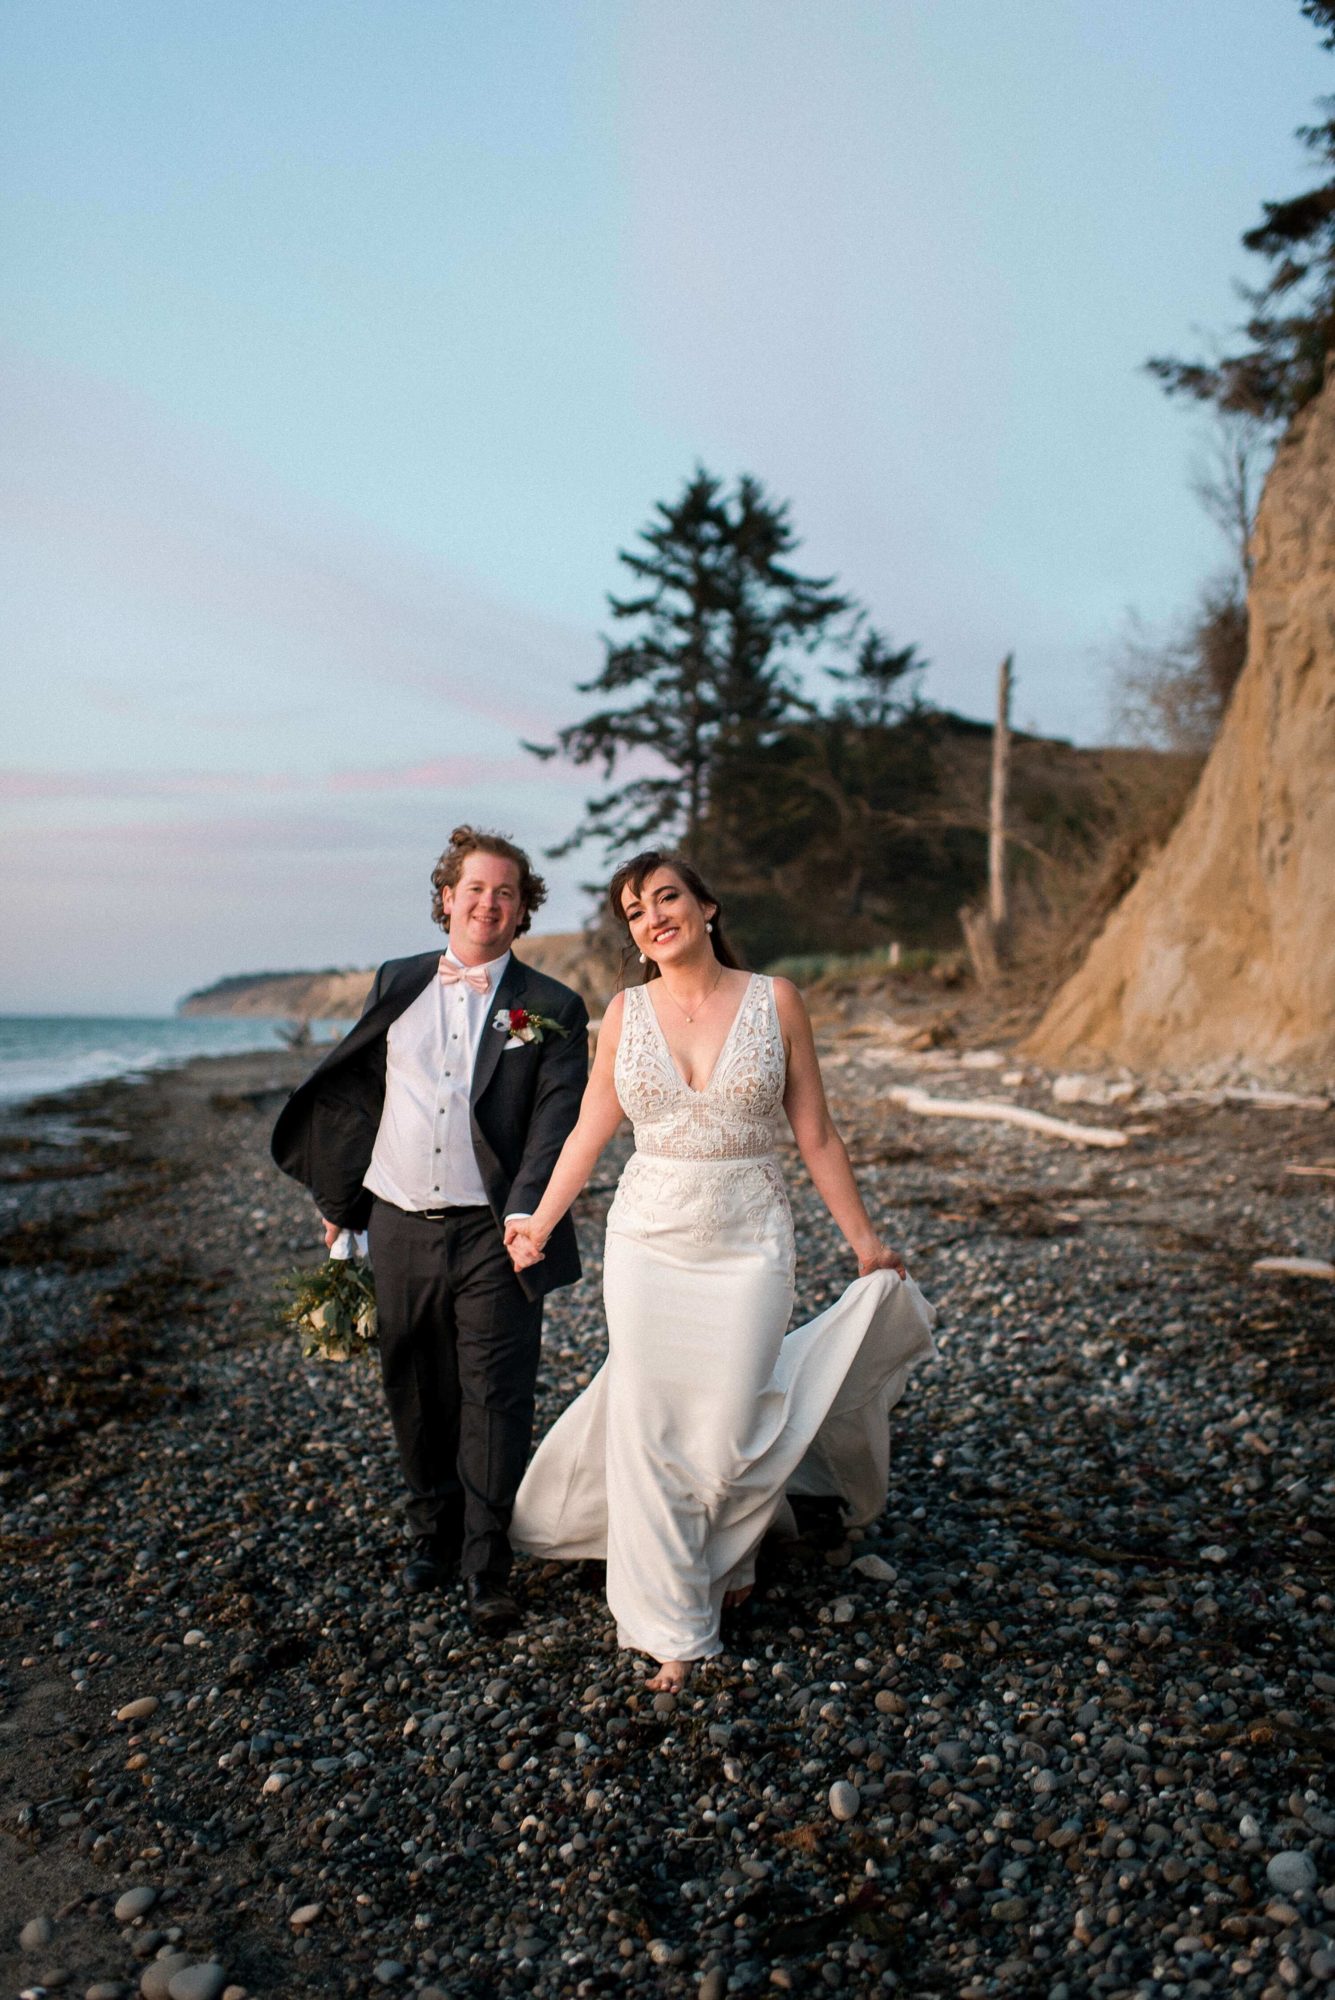 Bride and groom on the beach in kitsap county